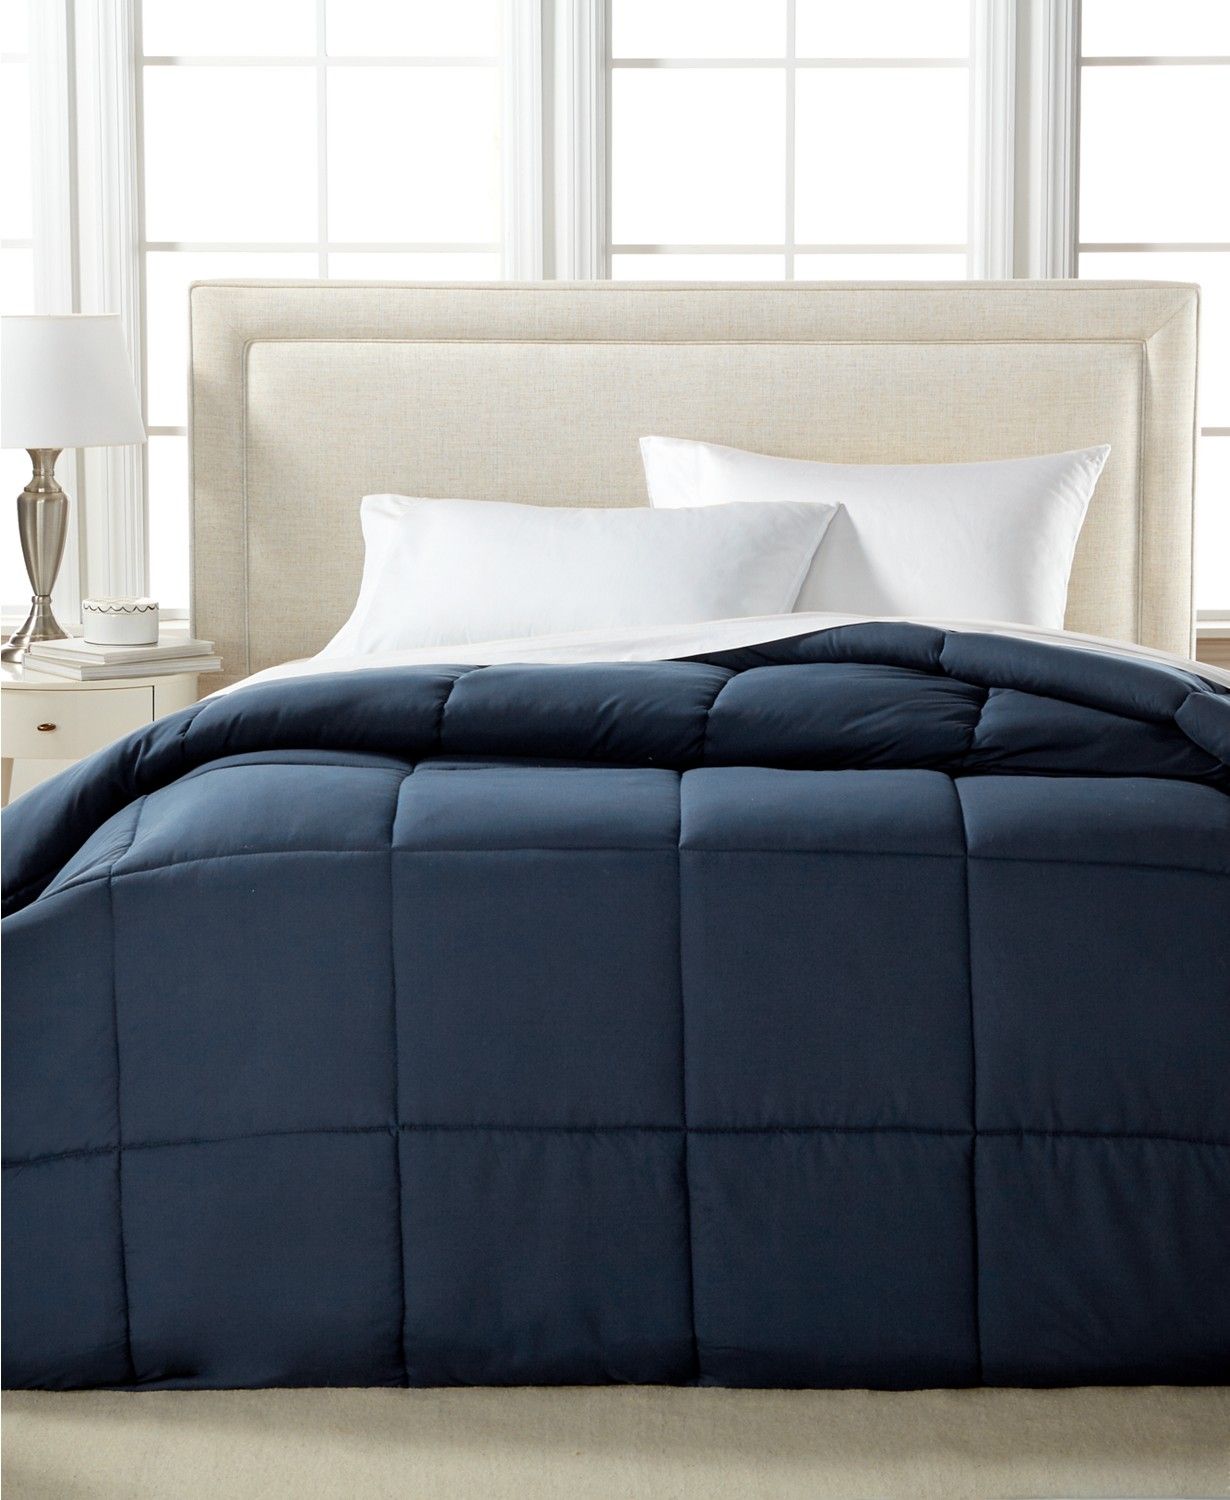 Royal Luxe Lightweight Microfiber Color Down Alternative King Comforter -$19.99(85% Off)